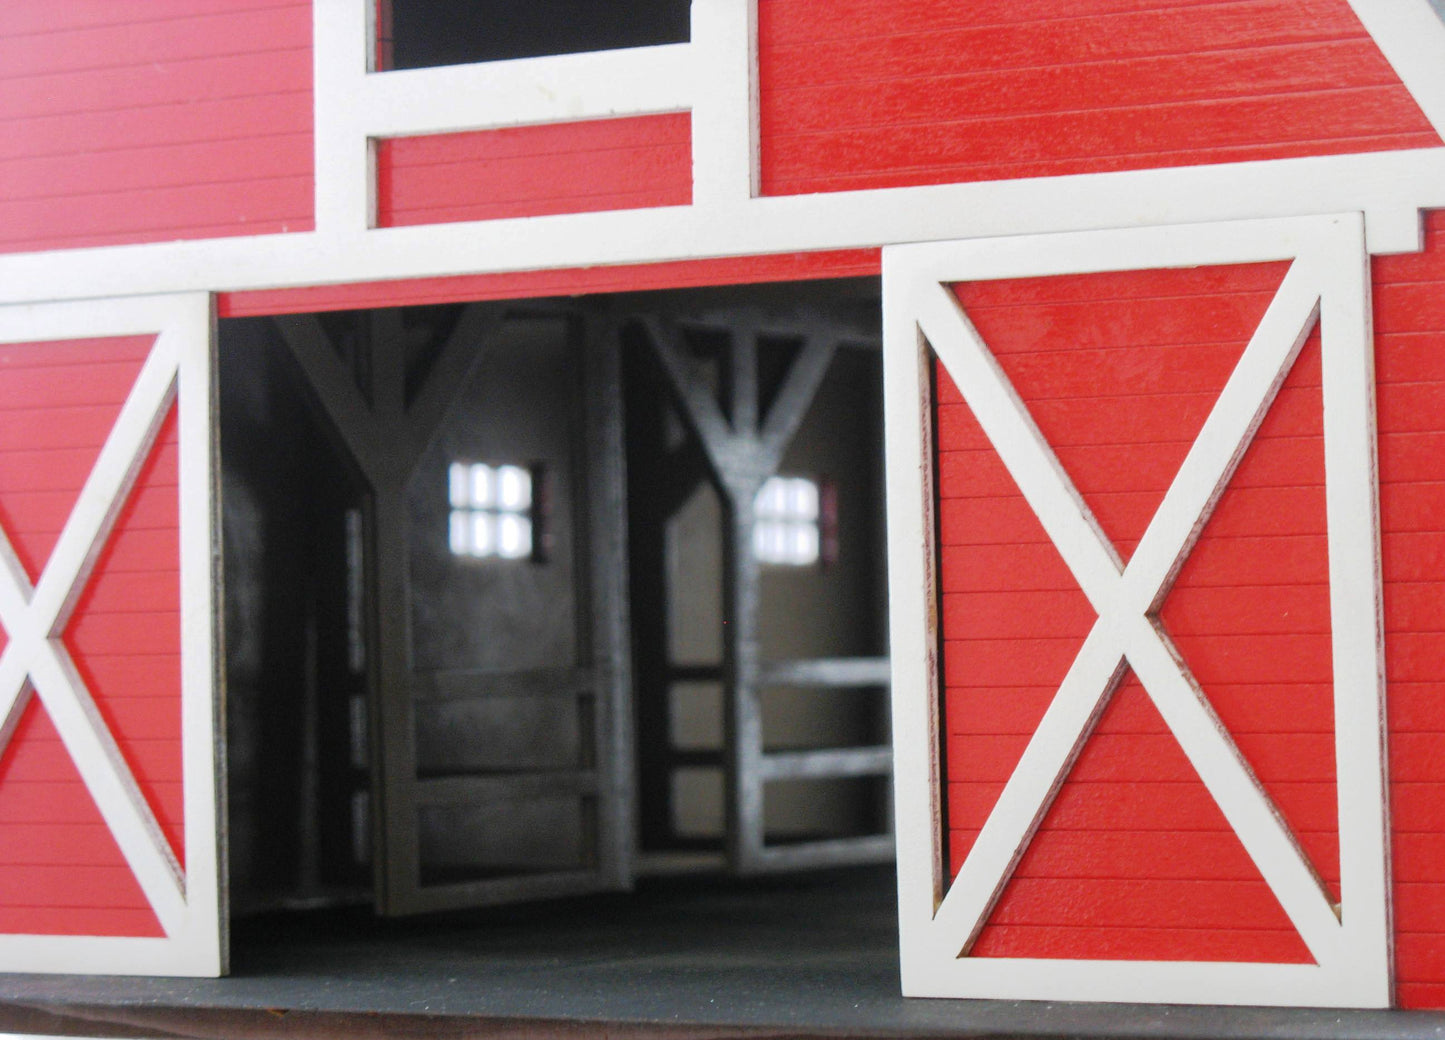 Barn with Stables Birdhouse Kit